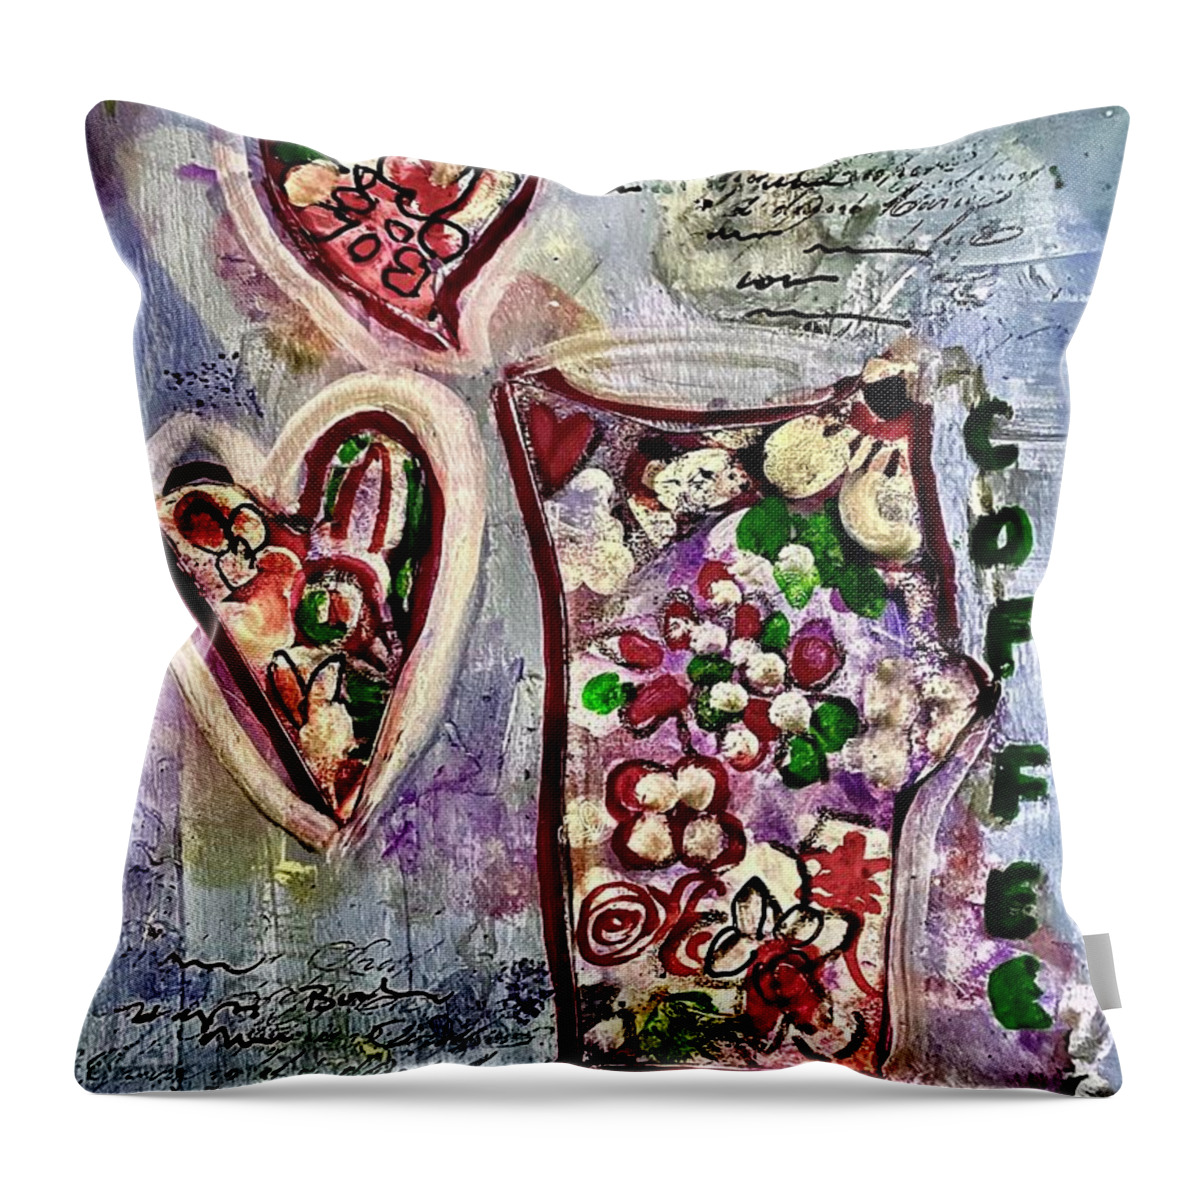 Poetry Throw Pillow featuring the painting Have Coffee with Me by Tommy McDonell